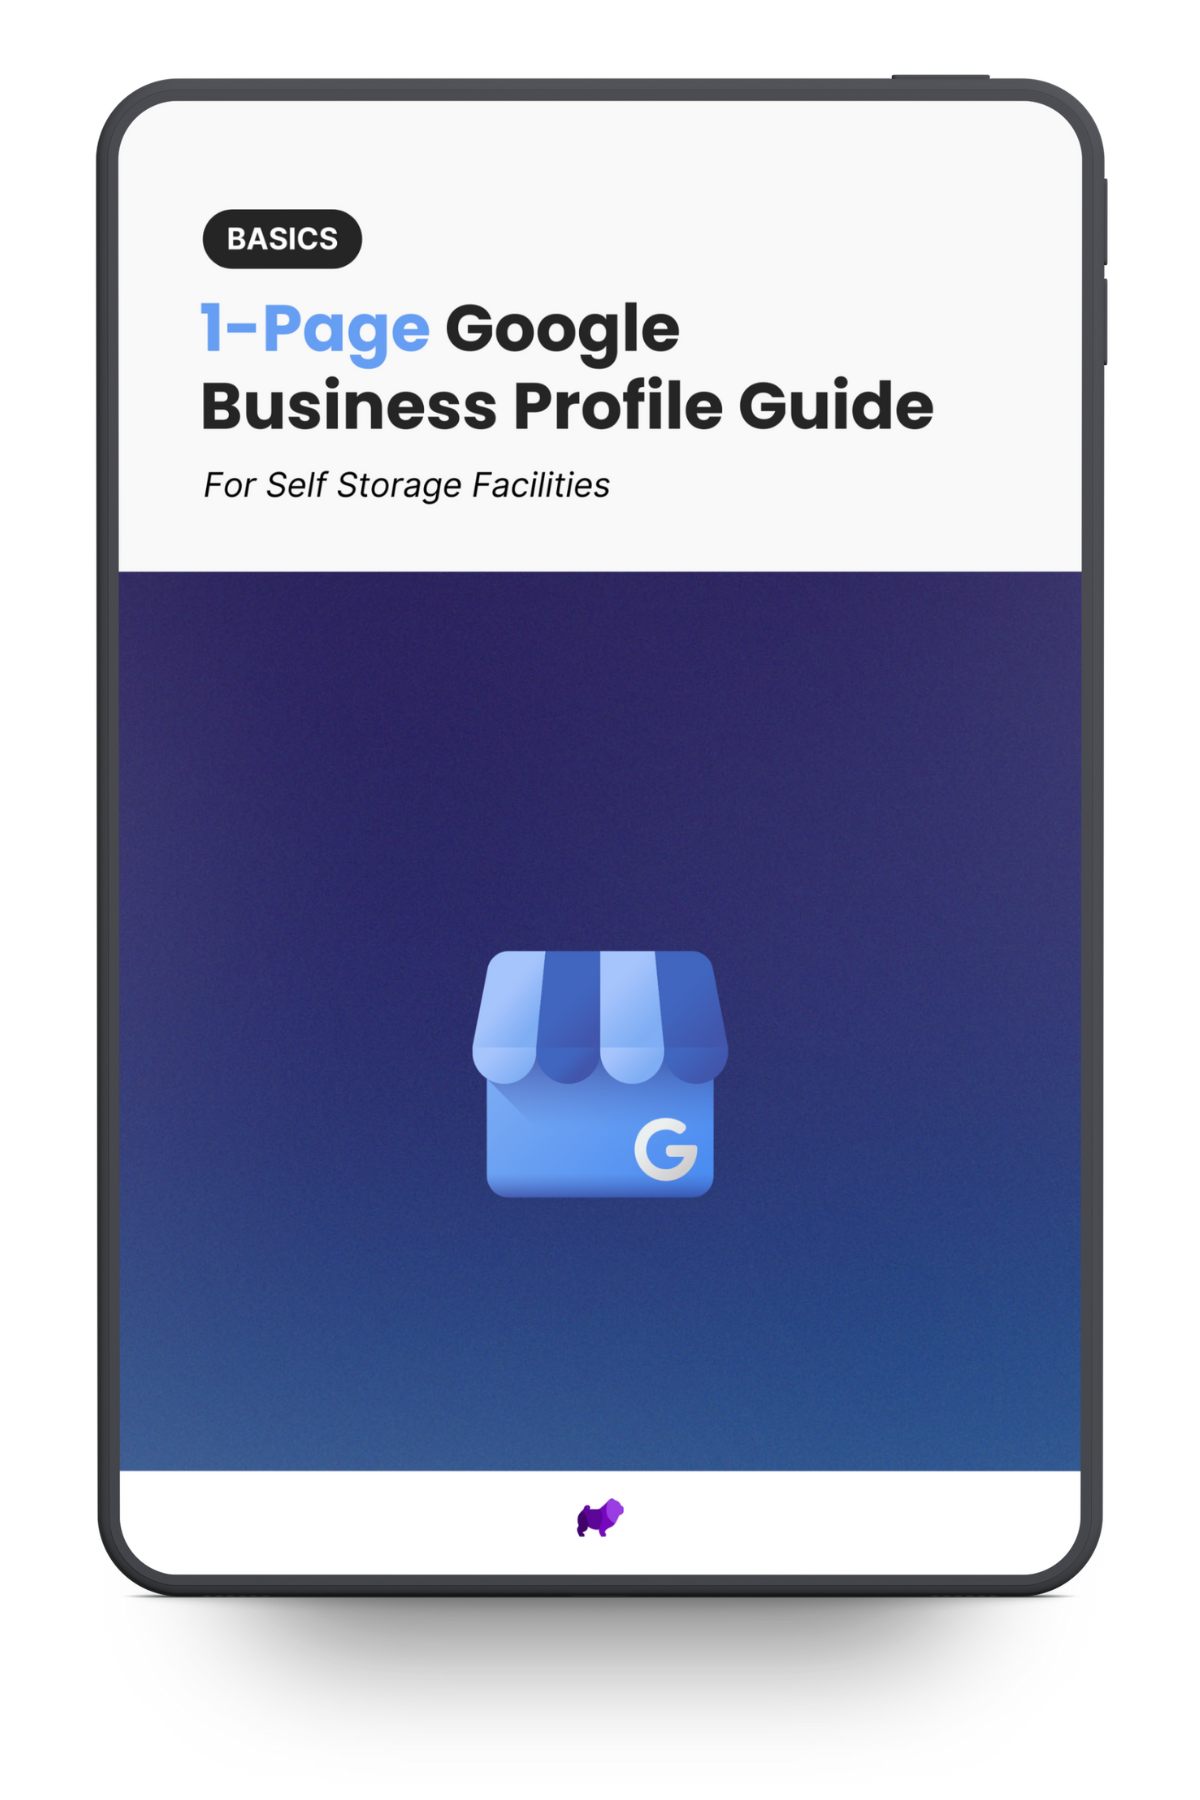 1 Page Google Business Profile Guide for Self Storage Facilities